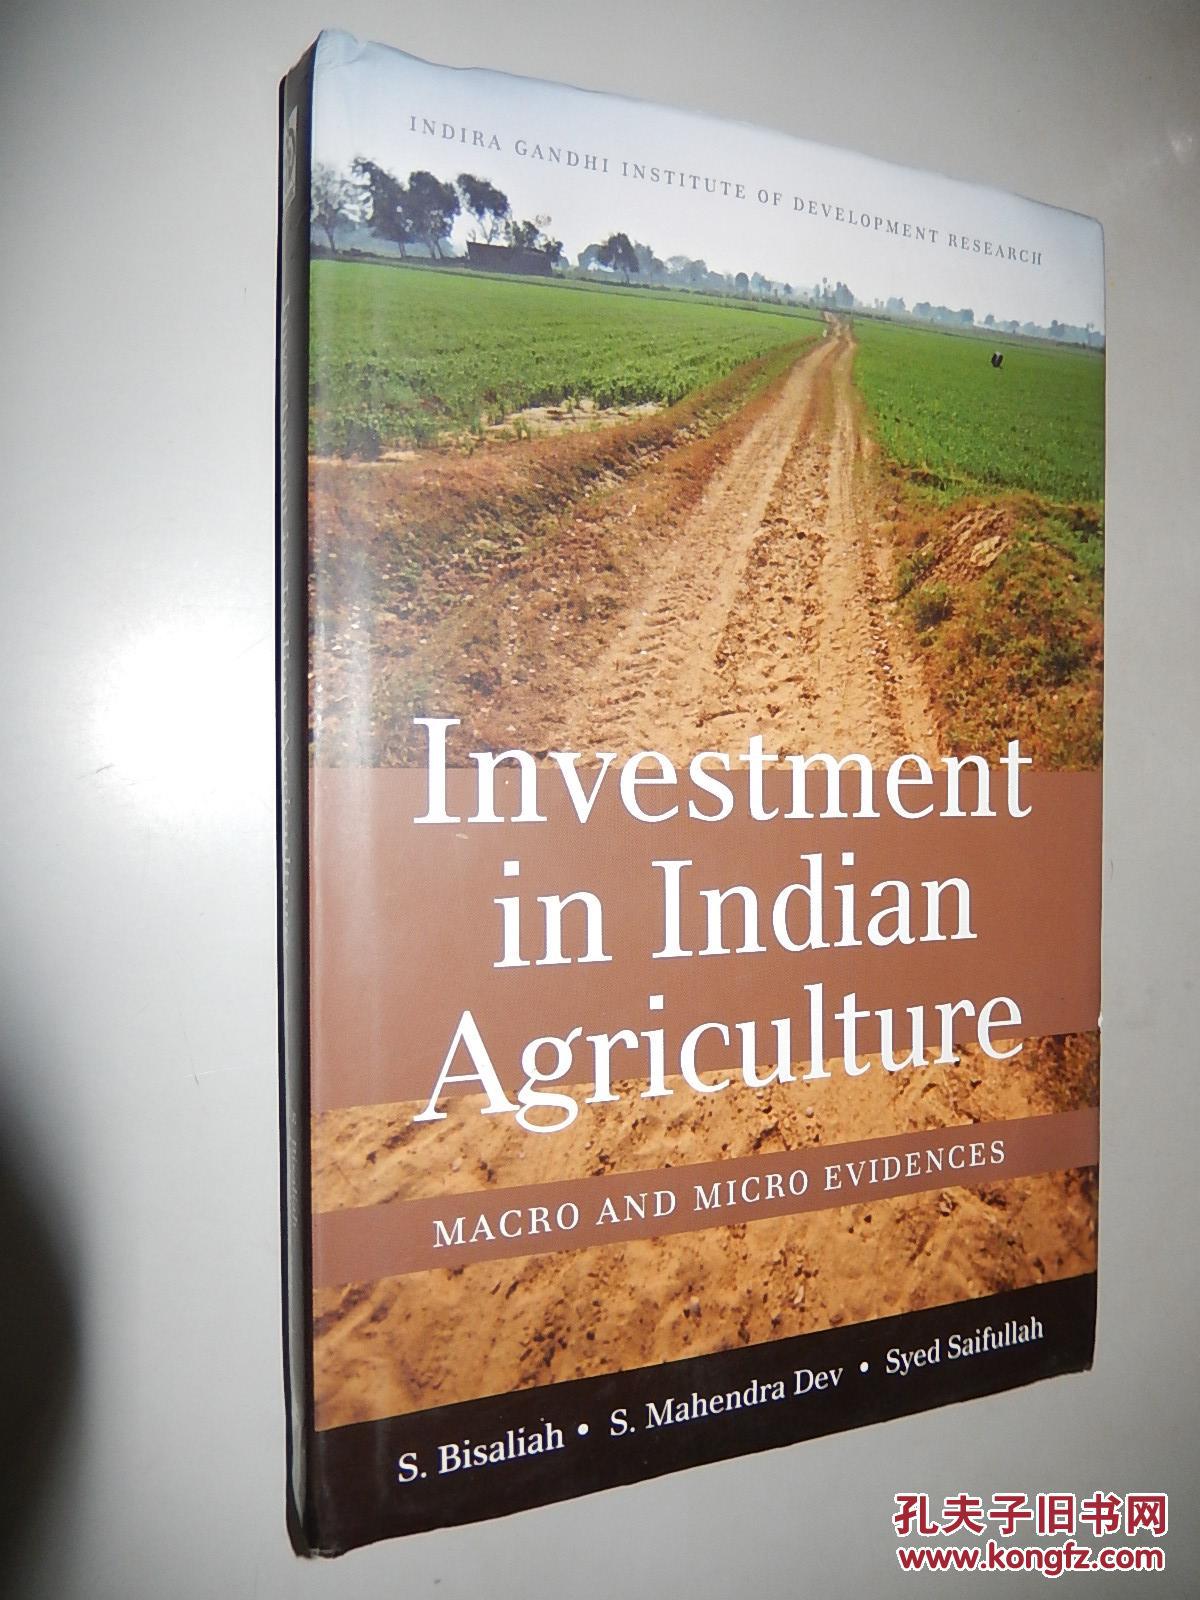 Investment in Indian Agriculture: Macro and Micro Evidences 英文原版精装 现货正版